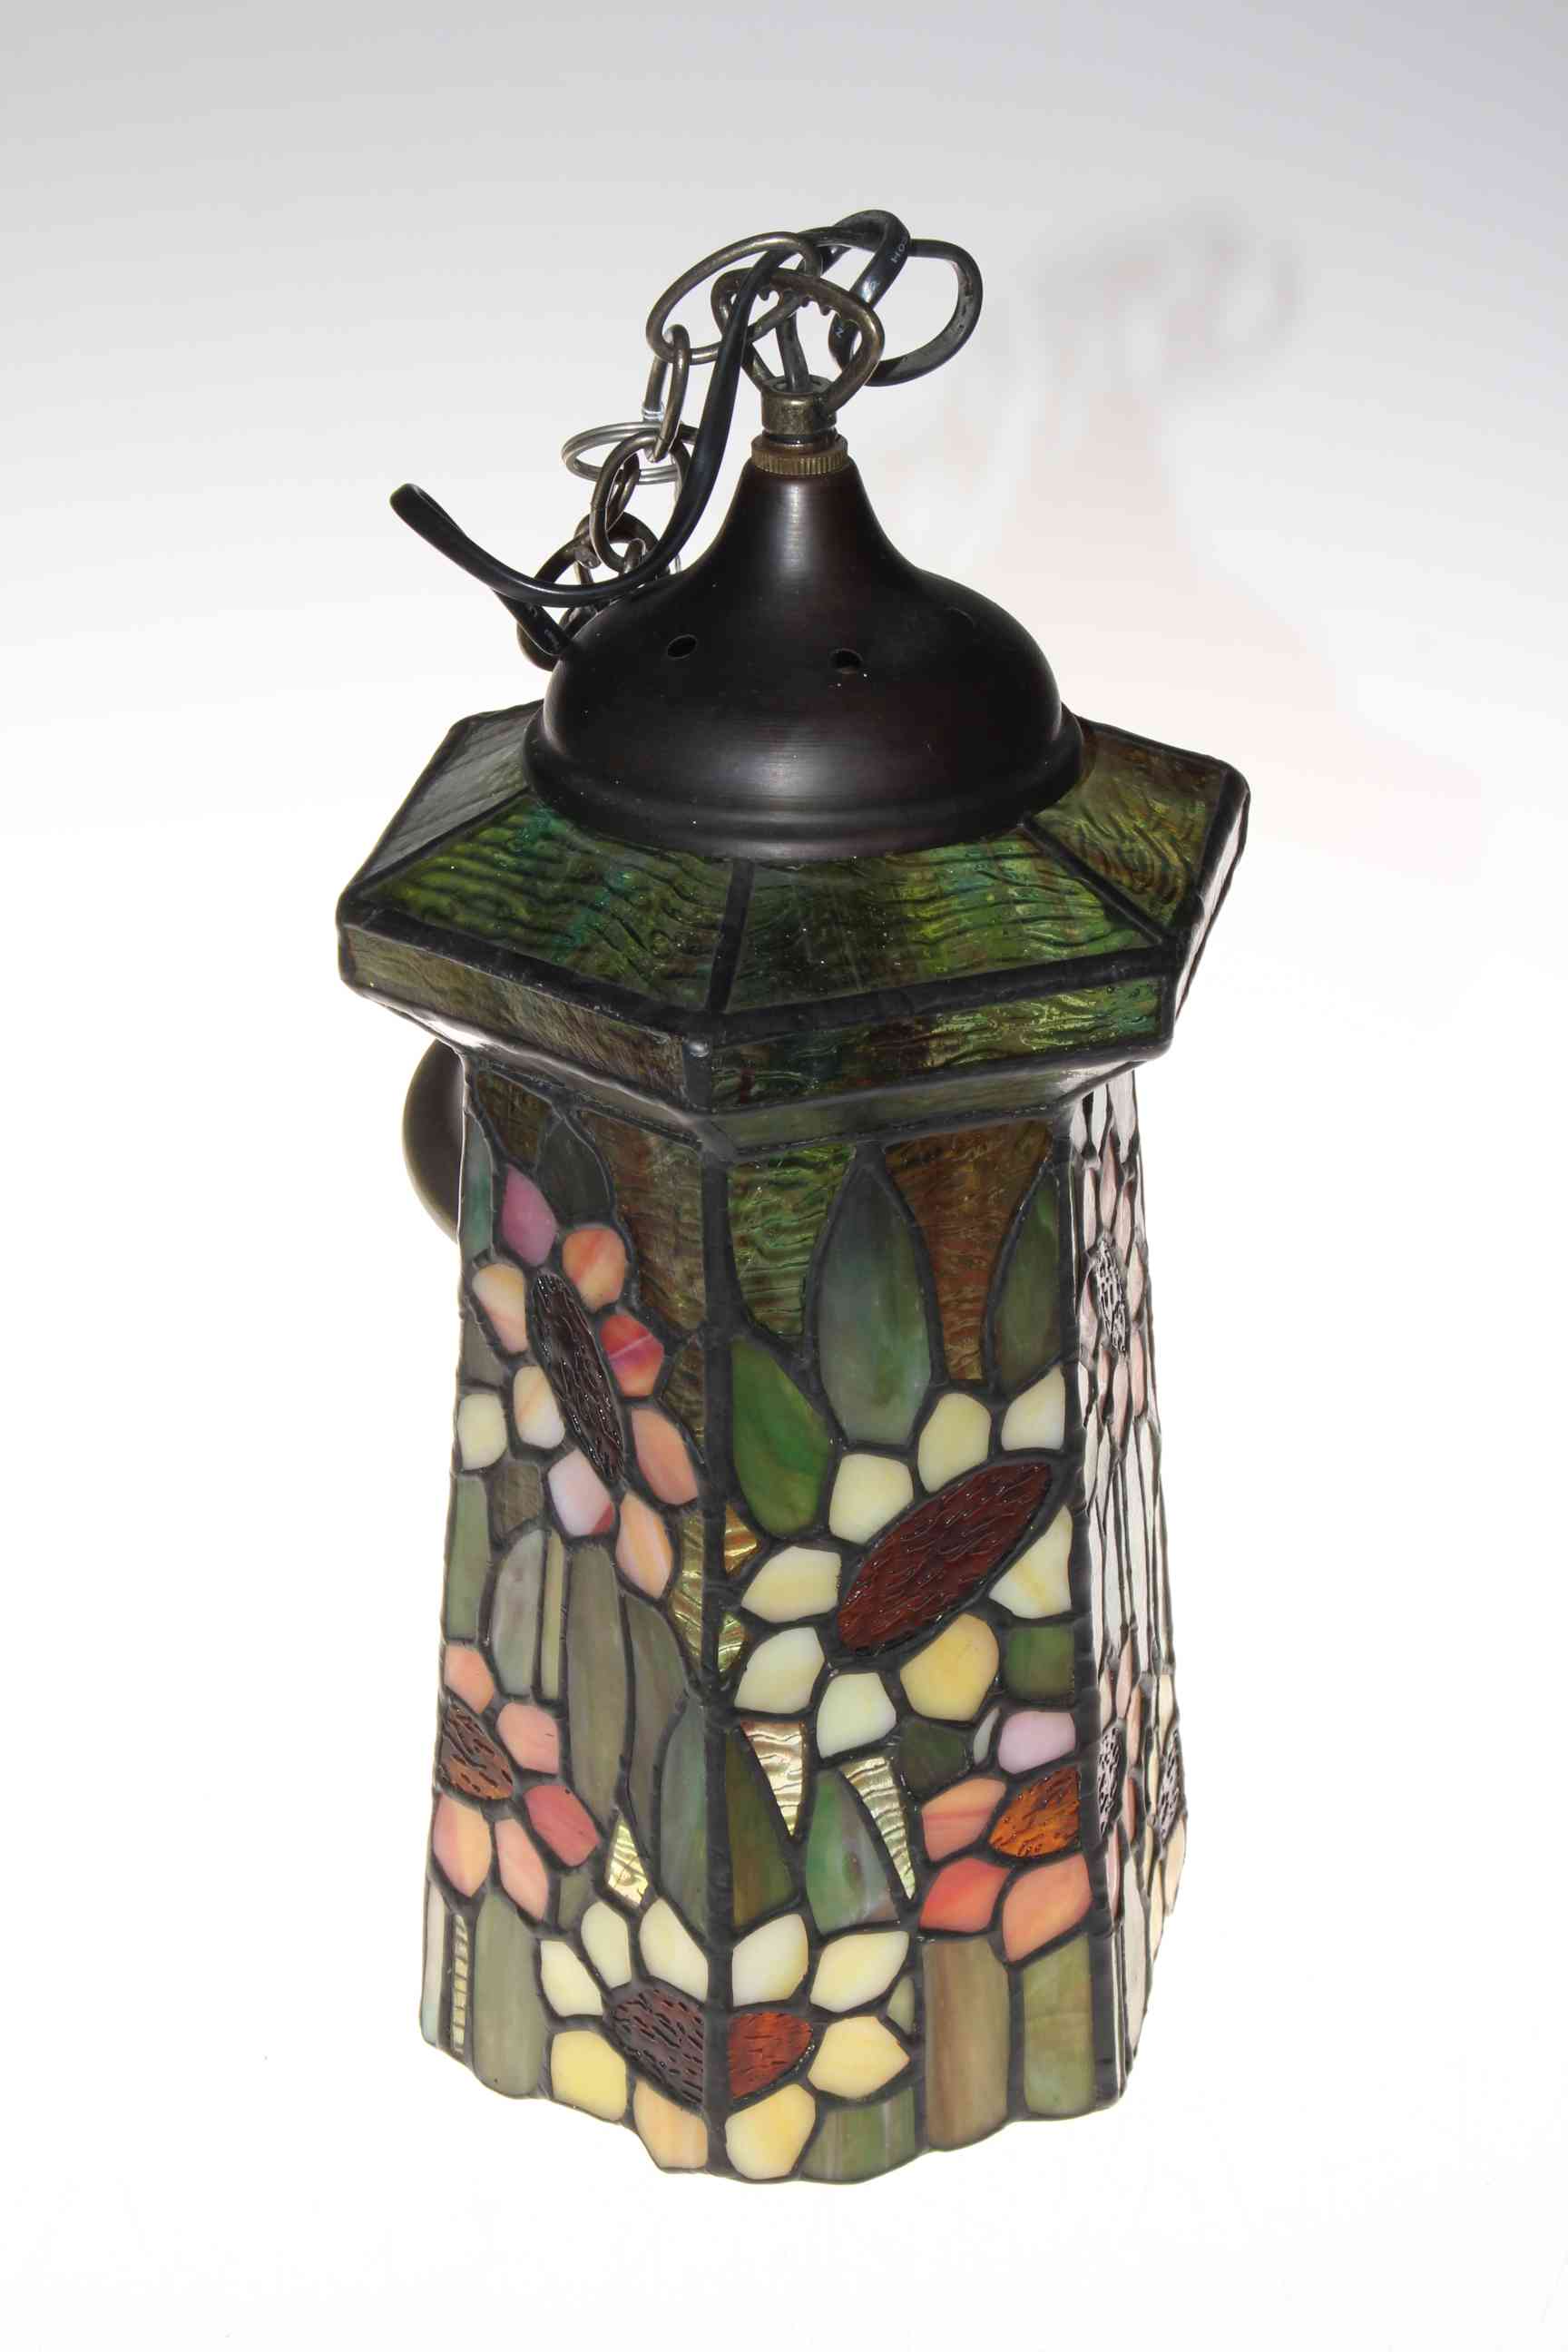 Masons Ironstone jug, 29cm and stained glass lantern, 38cm. - Image 2 of 2